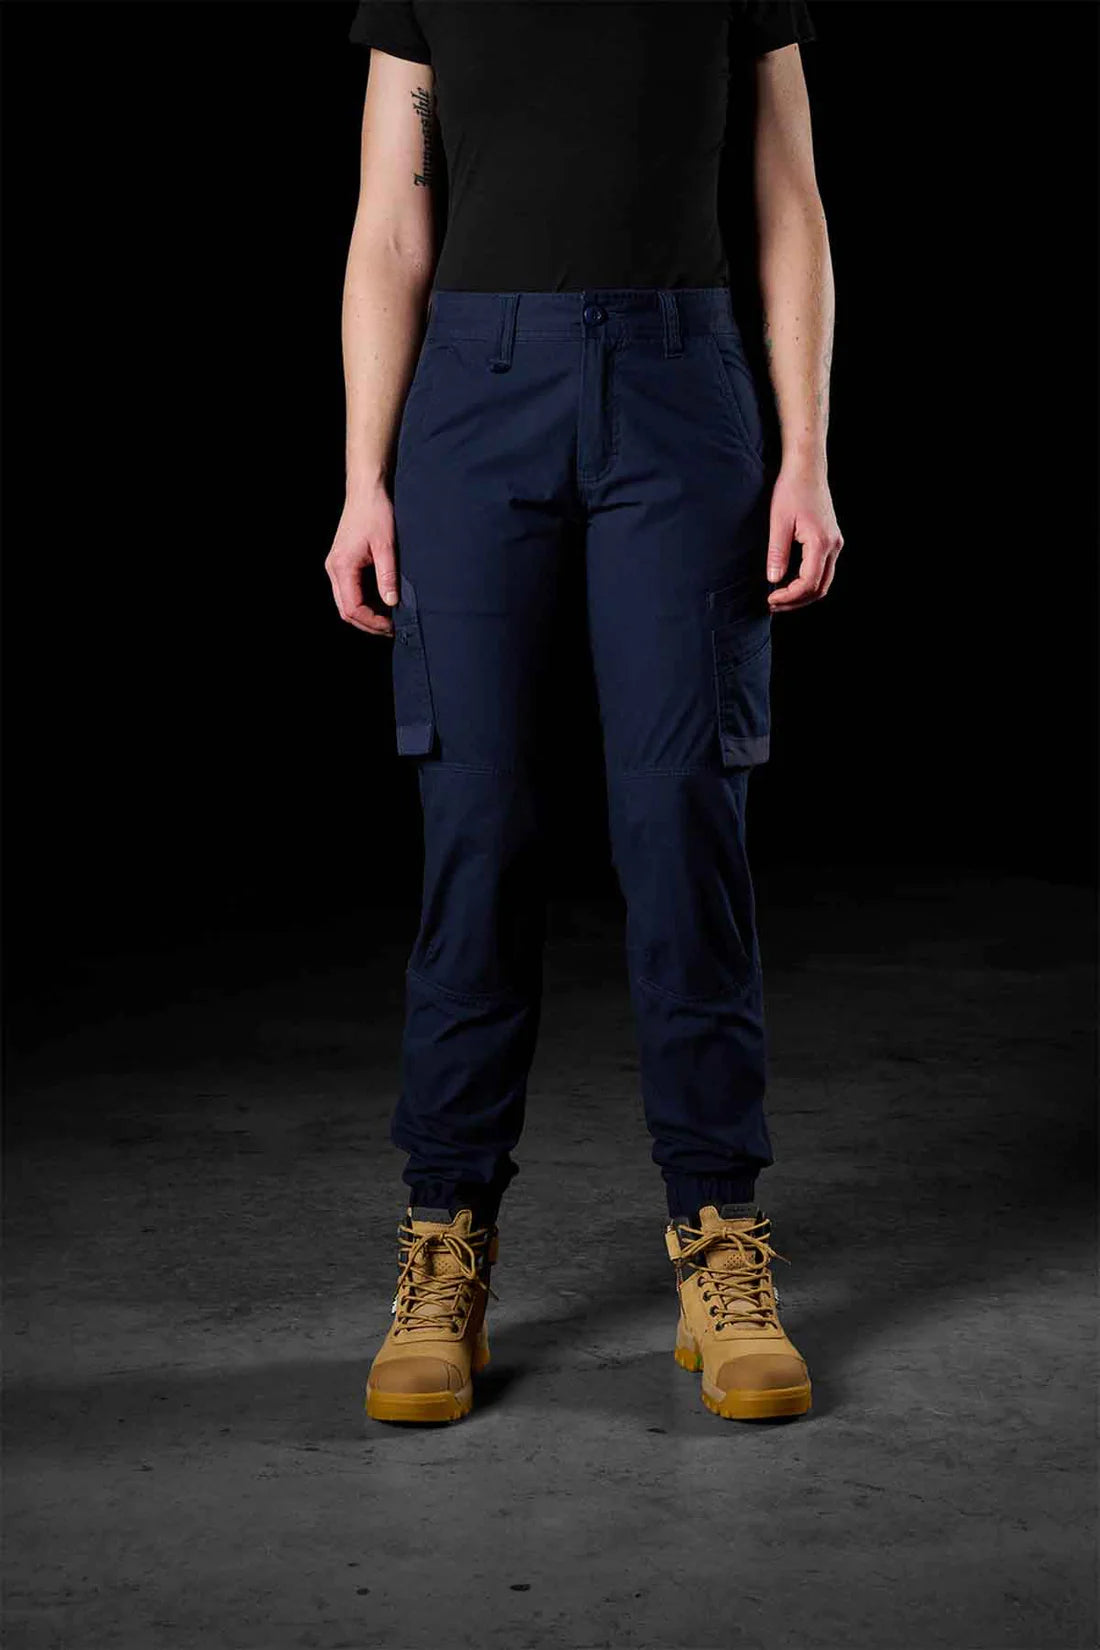 Fxd WP-8W Womens Cuffed Work Pant